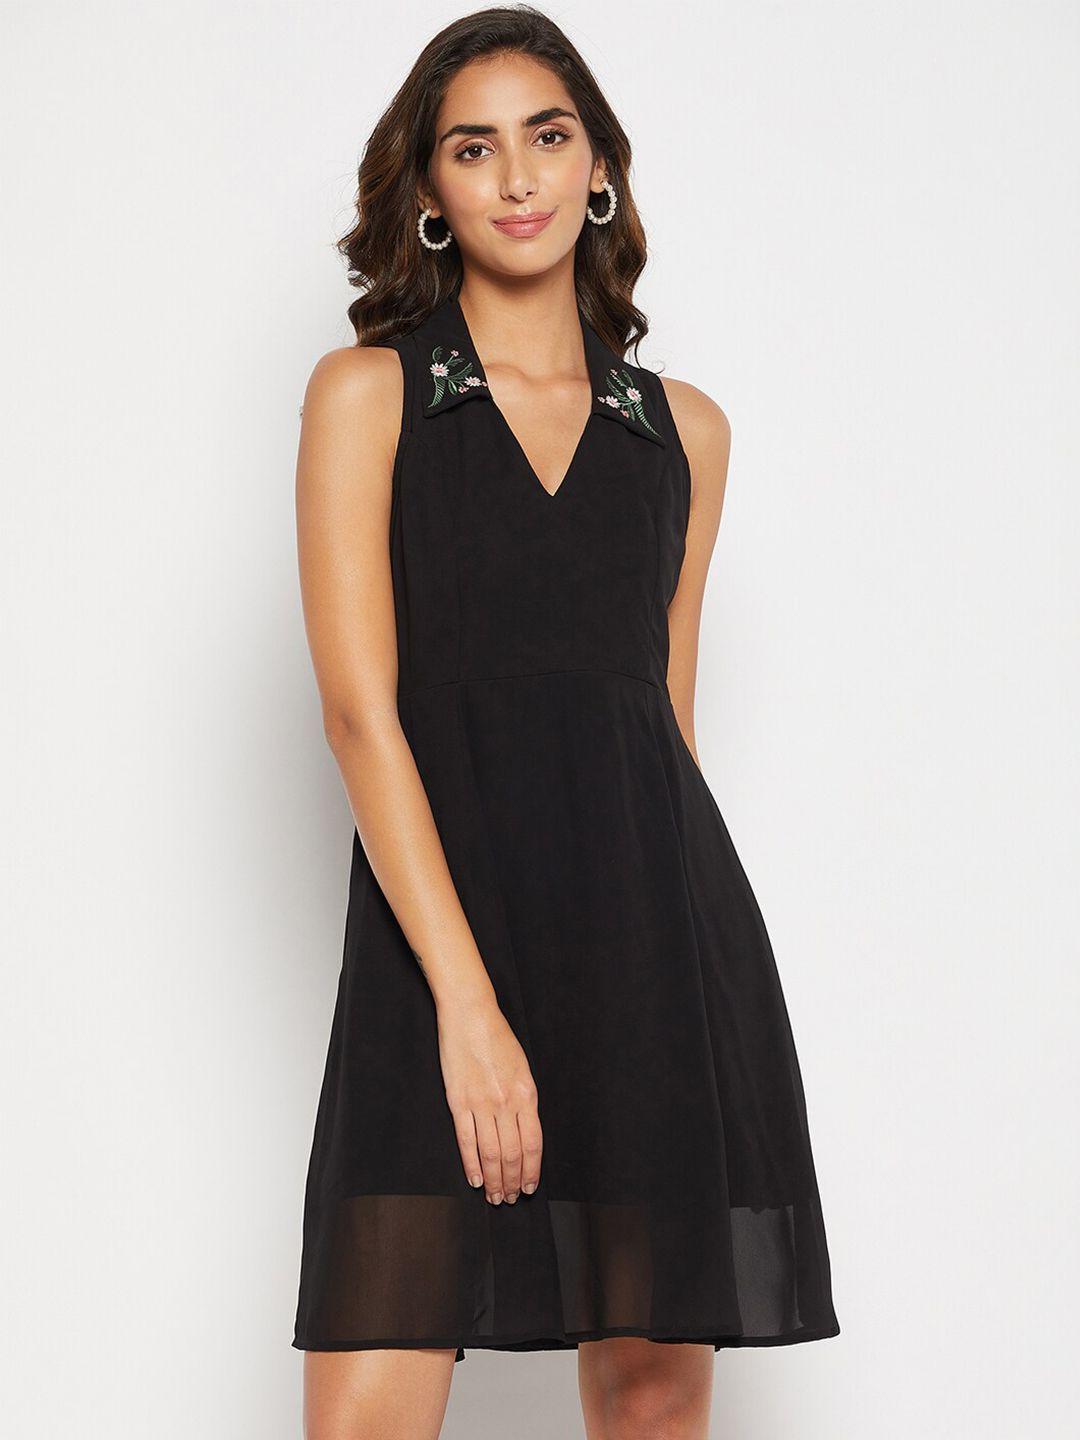 winered-embroidered-collar-neck-sleeveless-empire-dress